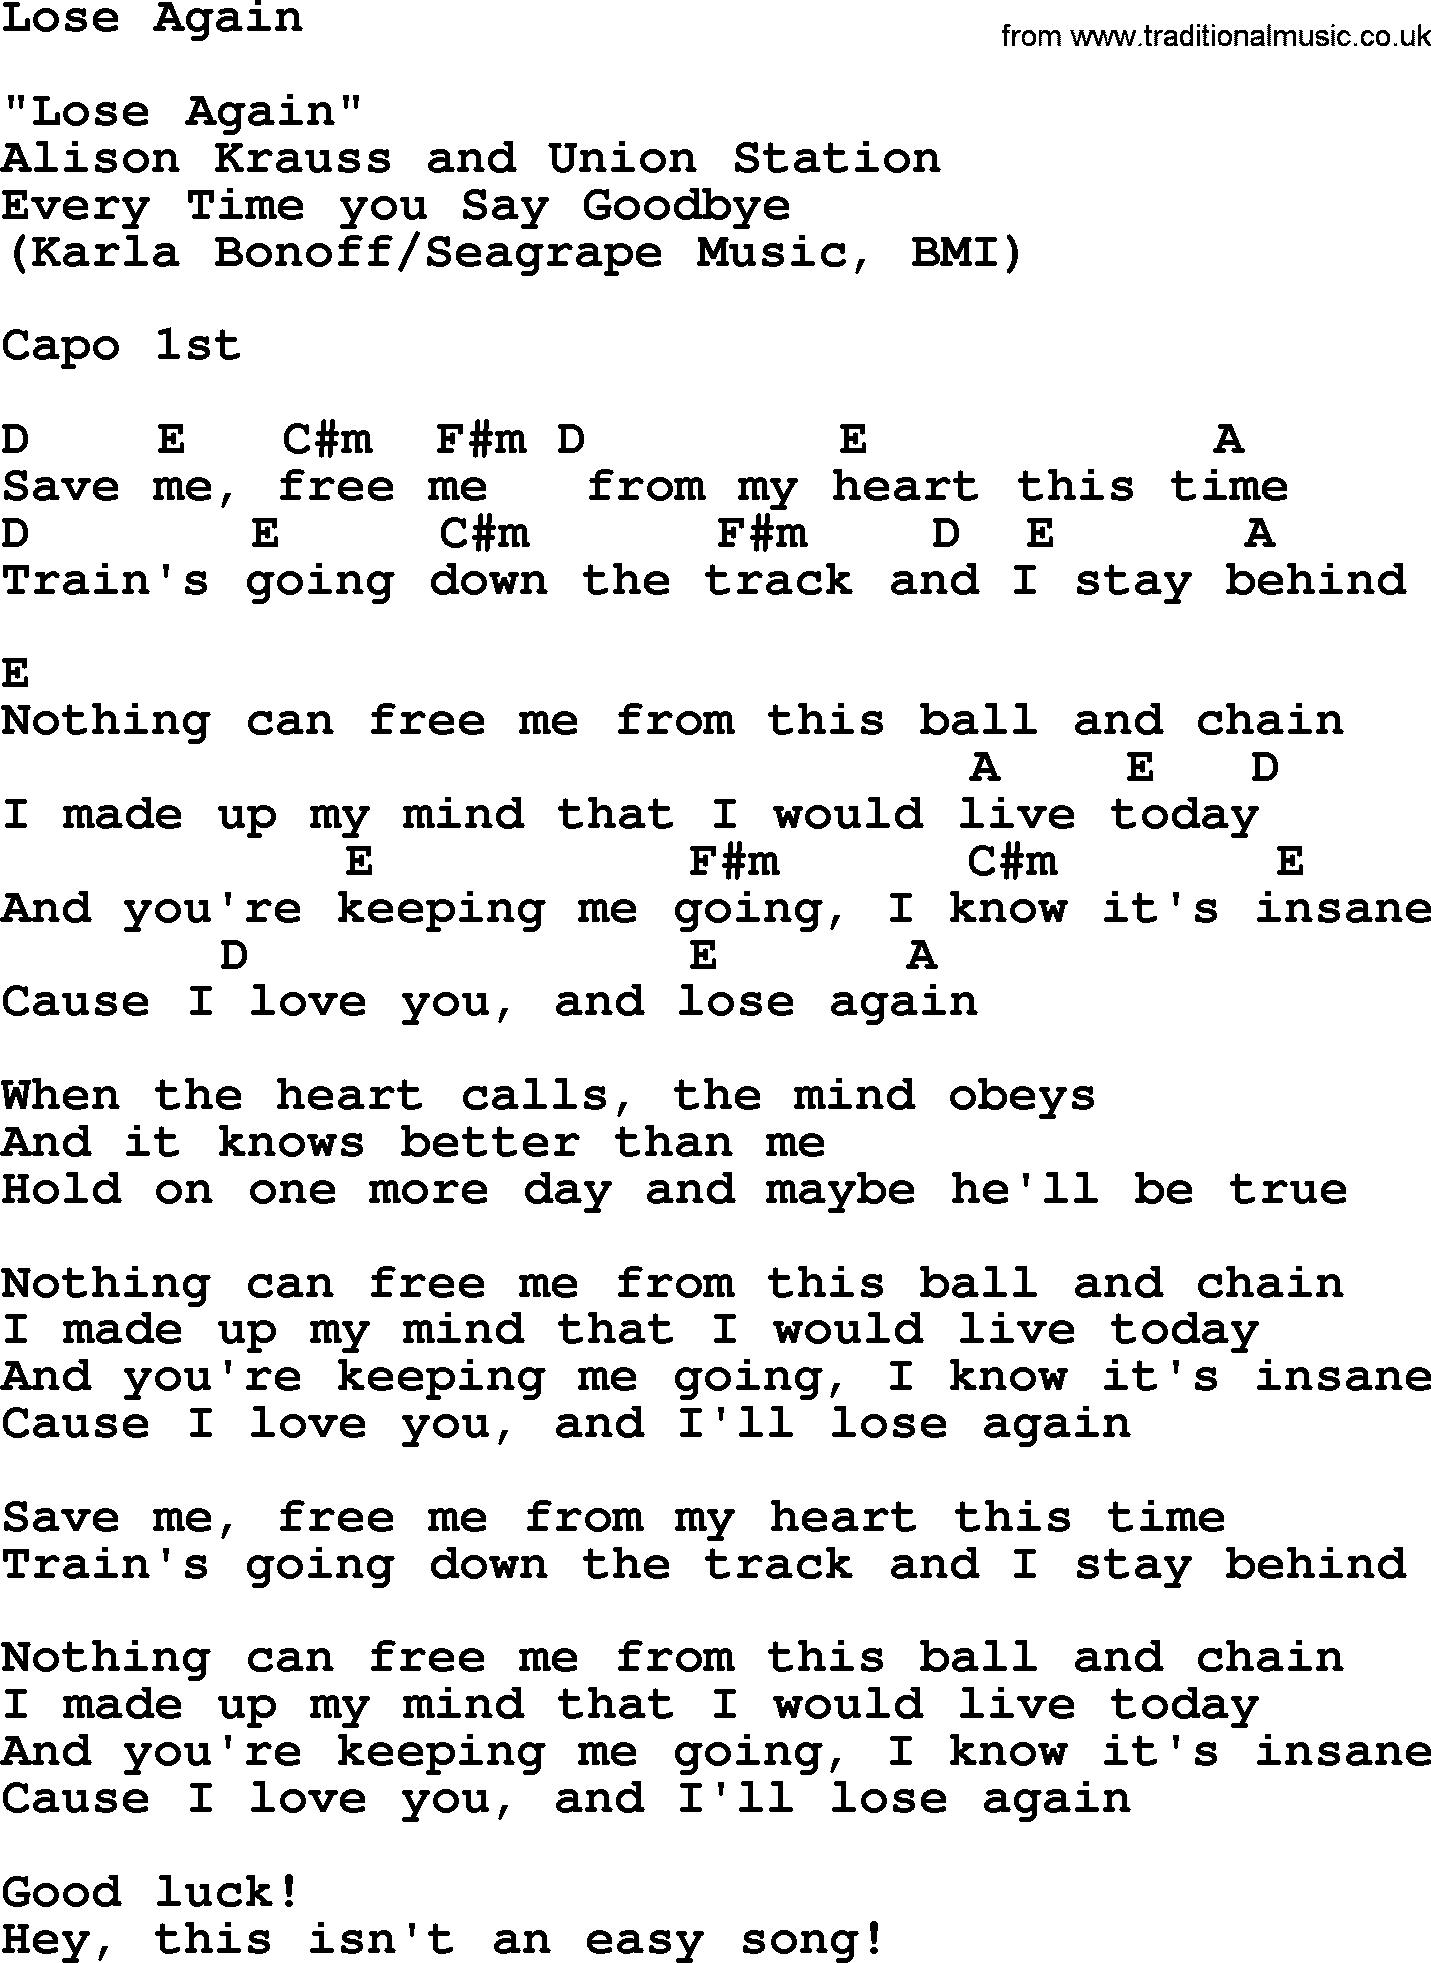 Bluegrass song: Lose Again, lyrics and chords